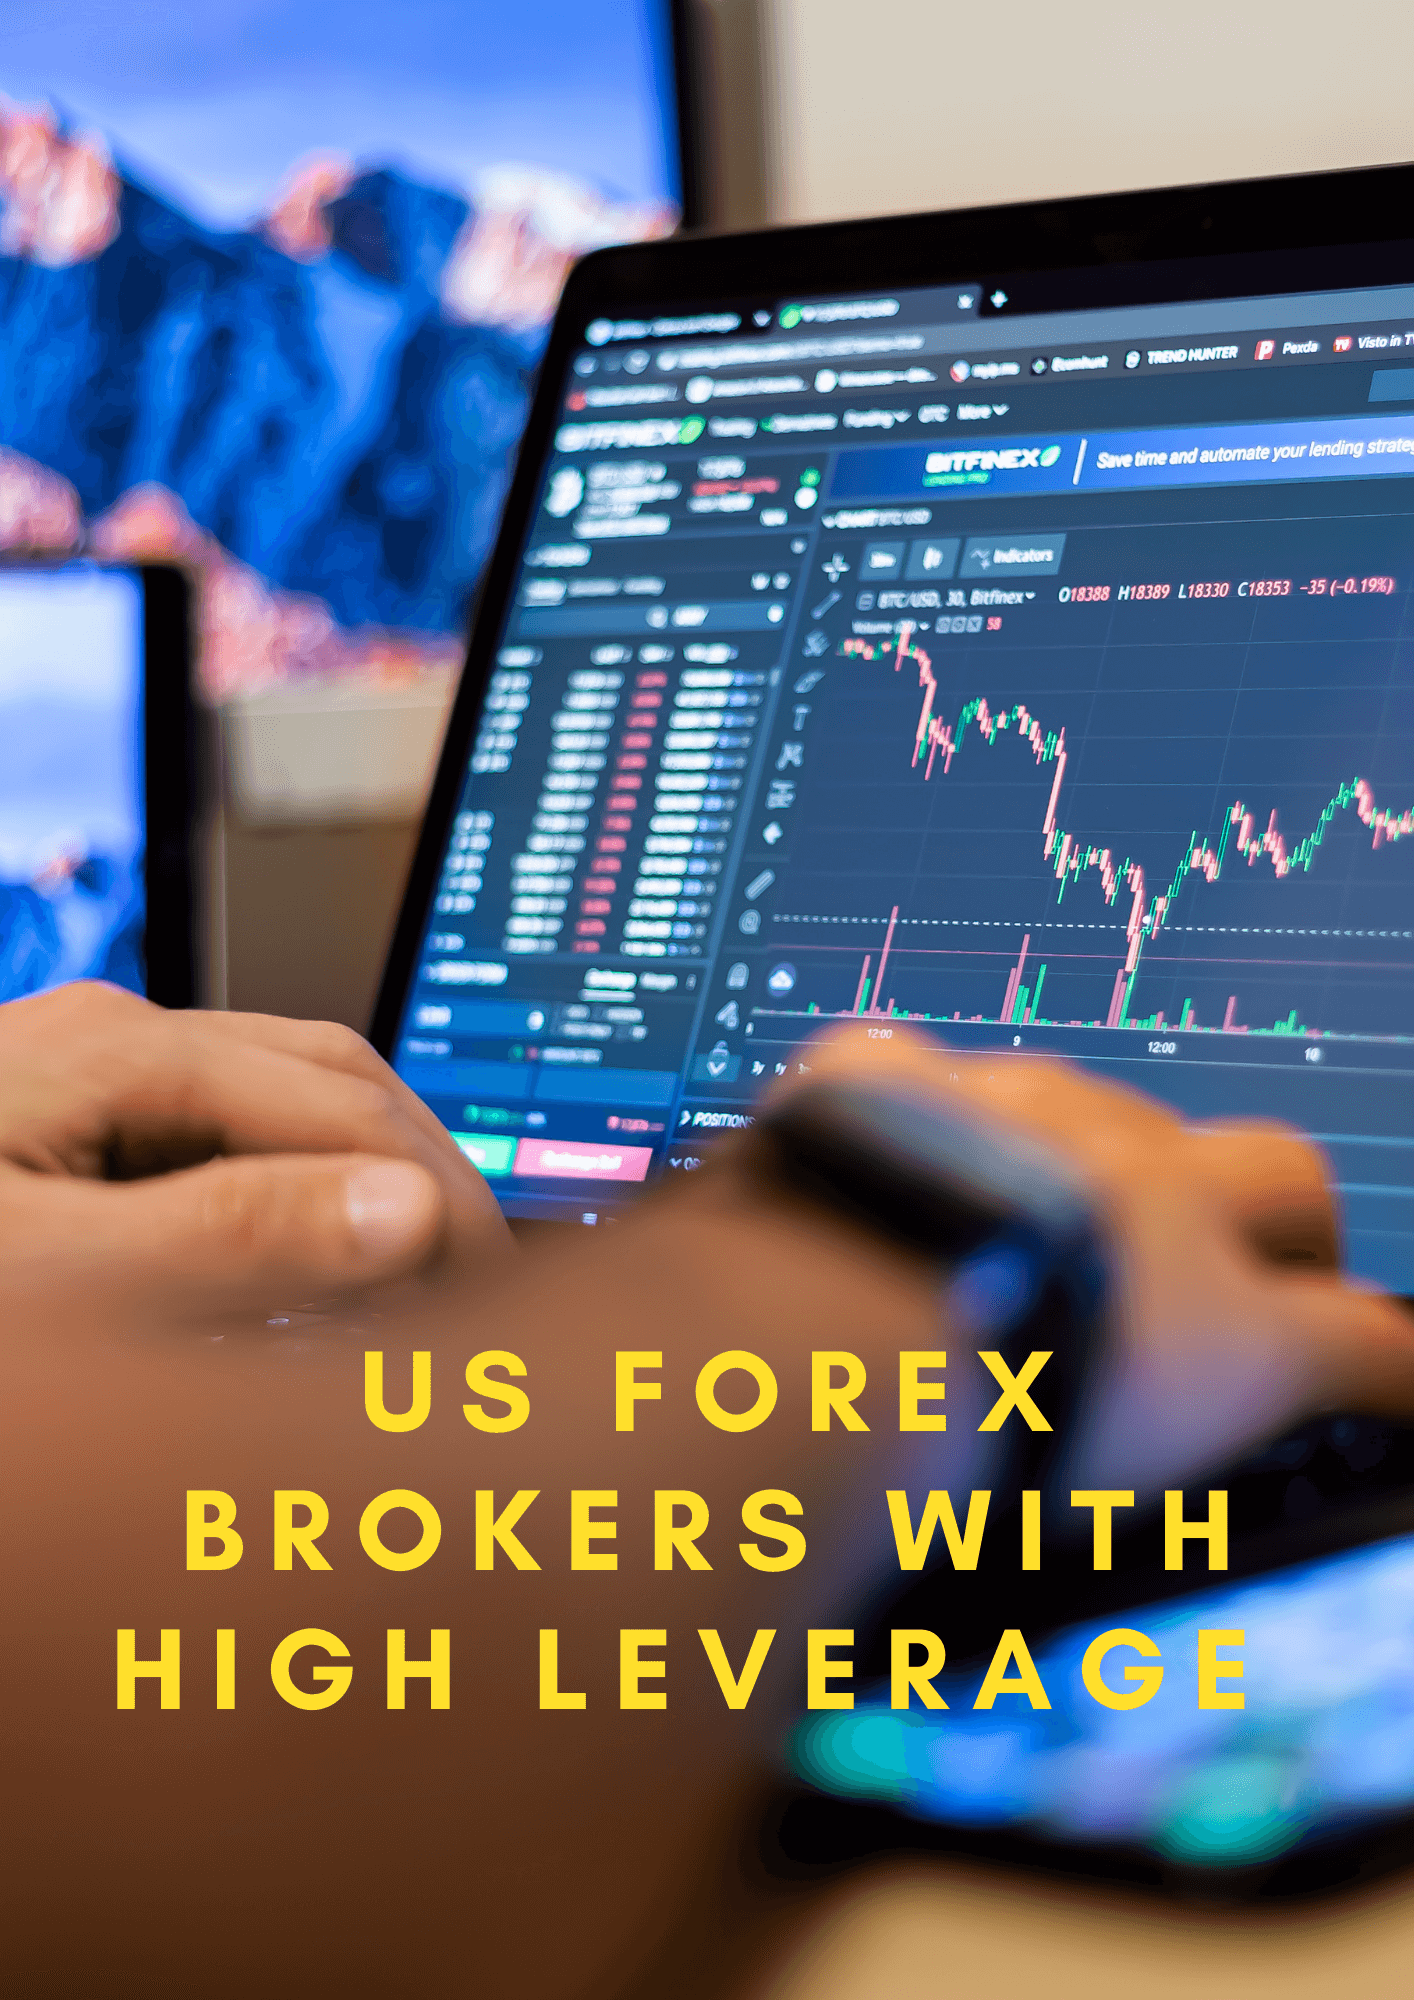 Us forex brokers with high leverage mugan bank forex charts